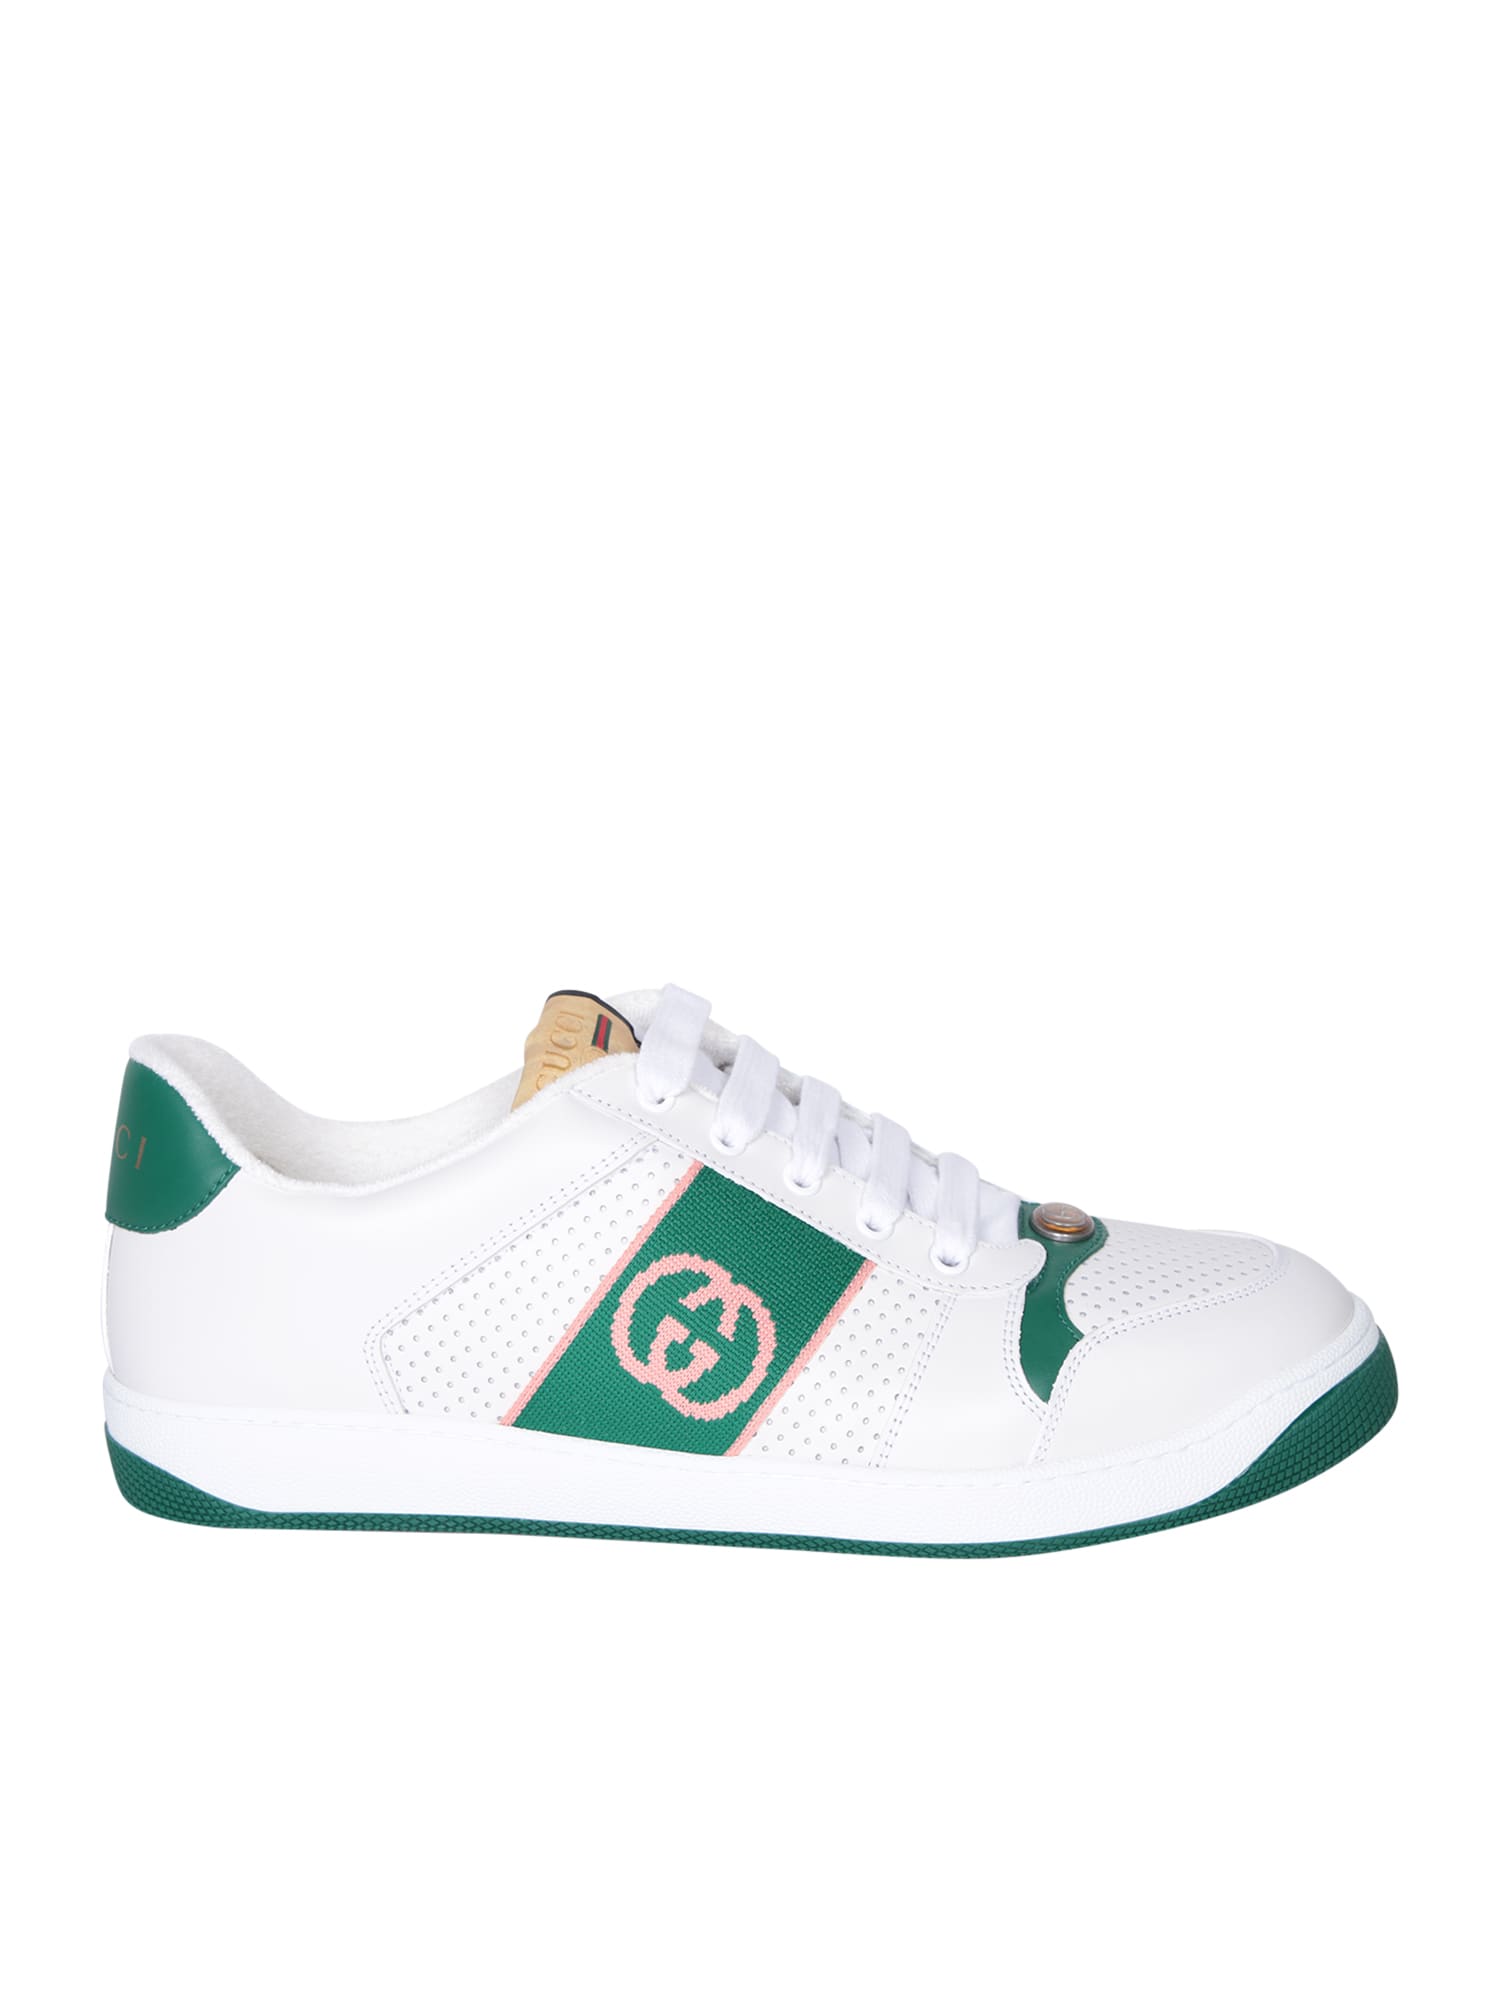 Gucci Screener Gg Green/pink Sneakers In White